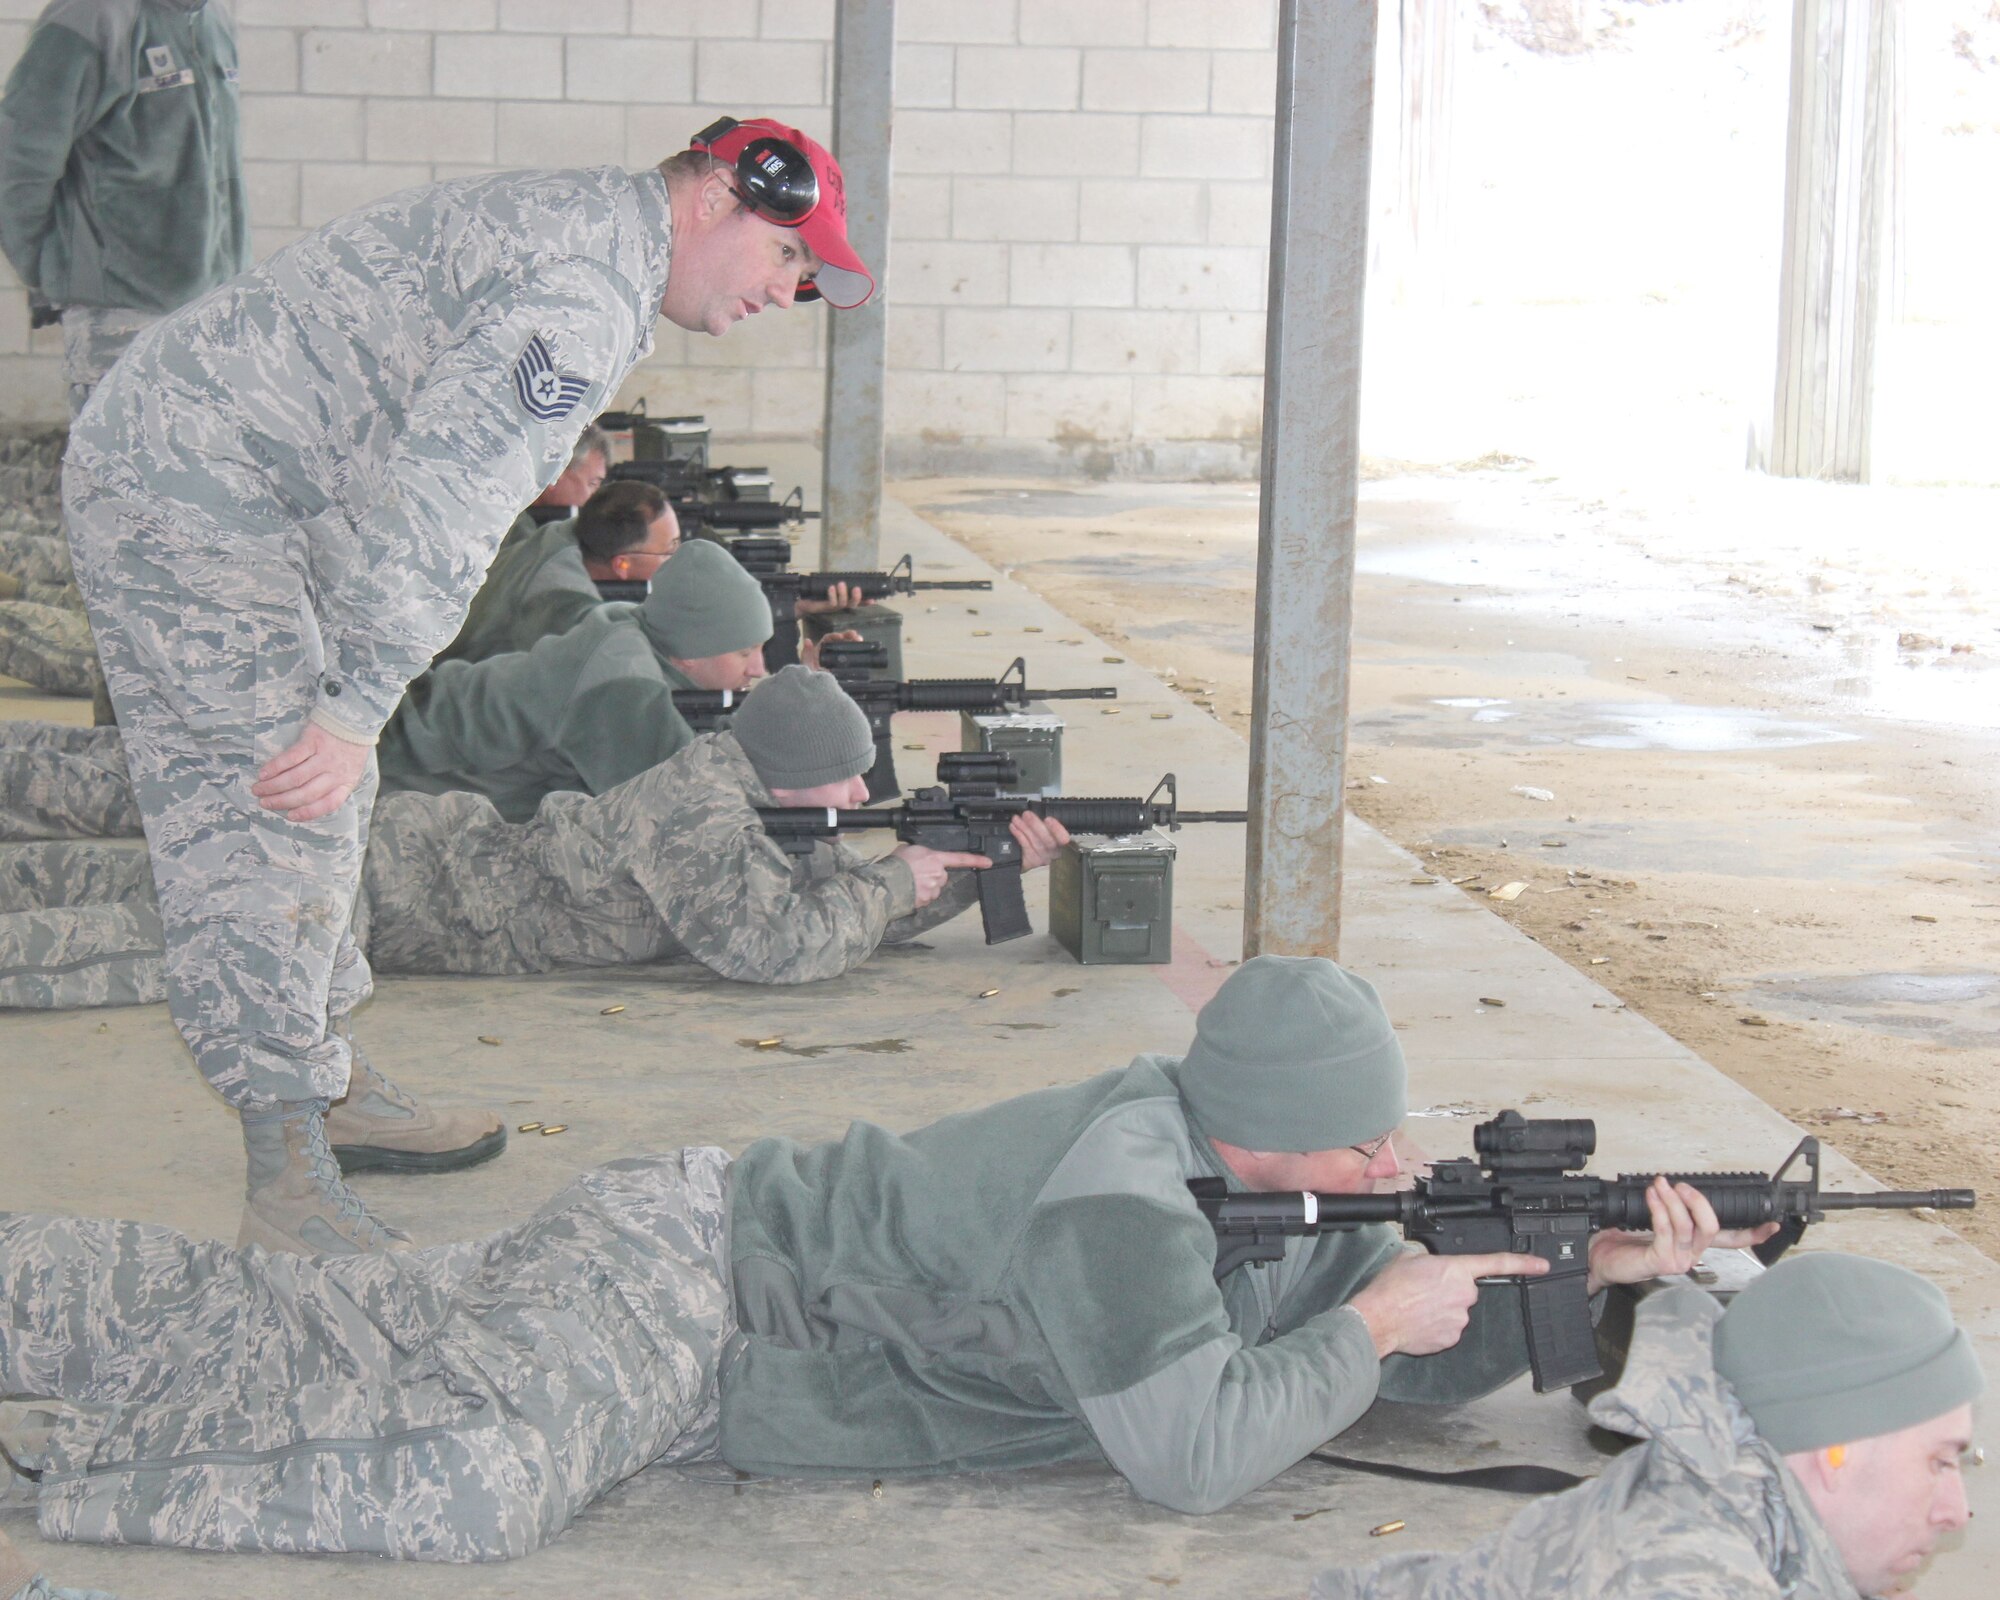 Tech. Sgt. Brad Vermeesch serves as a safety monitor while observing marksmanship training at Selfridge Air National Guard Base, Mich., Feb. 4, 2018. The Citizen-Airmen of the 127th Wing spent the February regularly scheduled drill focused on expeditionary skills training.